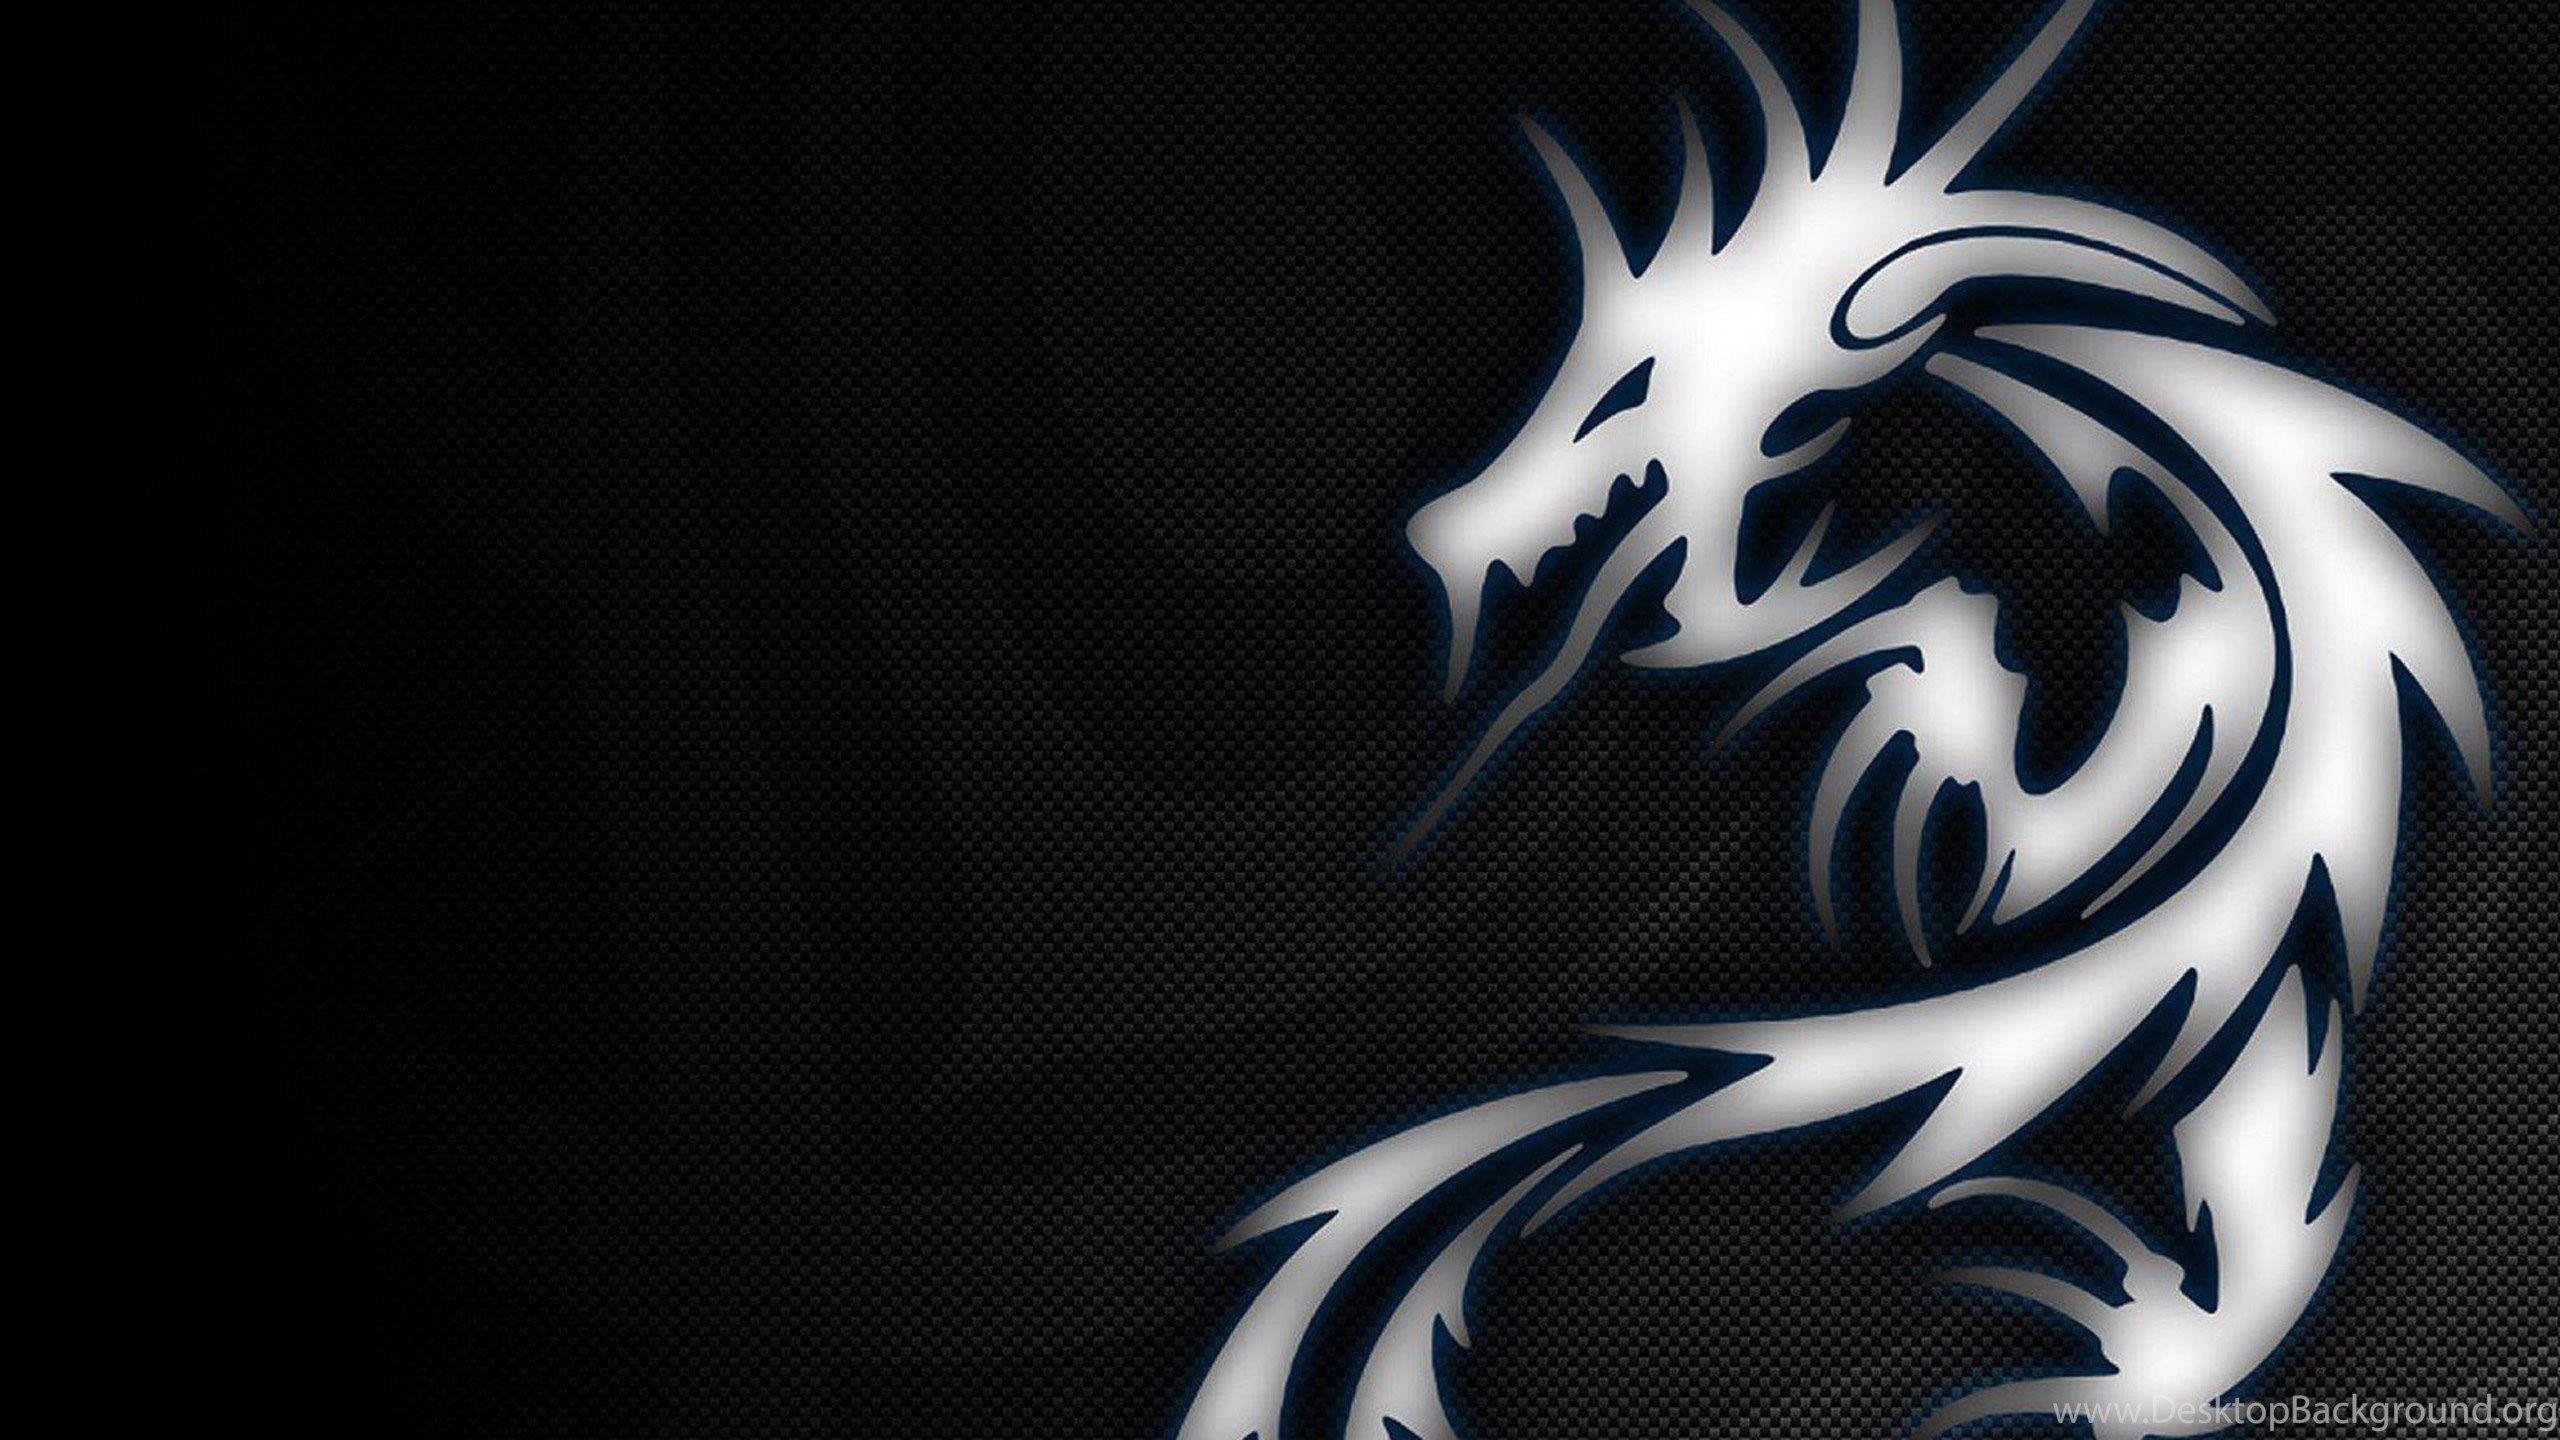 Dragon Logo wallpaper by Mr__Wanted - Download on ZEDGE™ | 9f2a